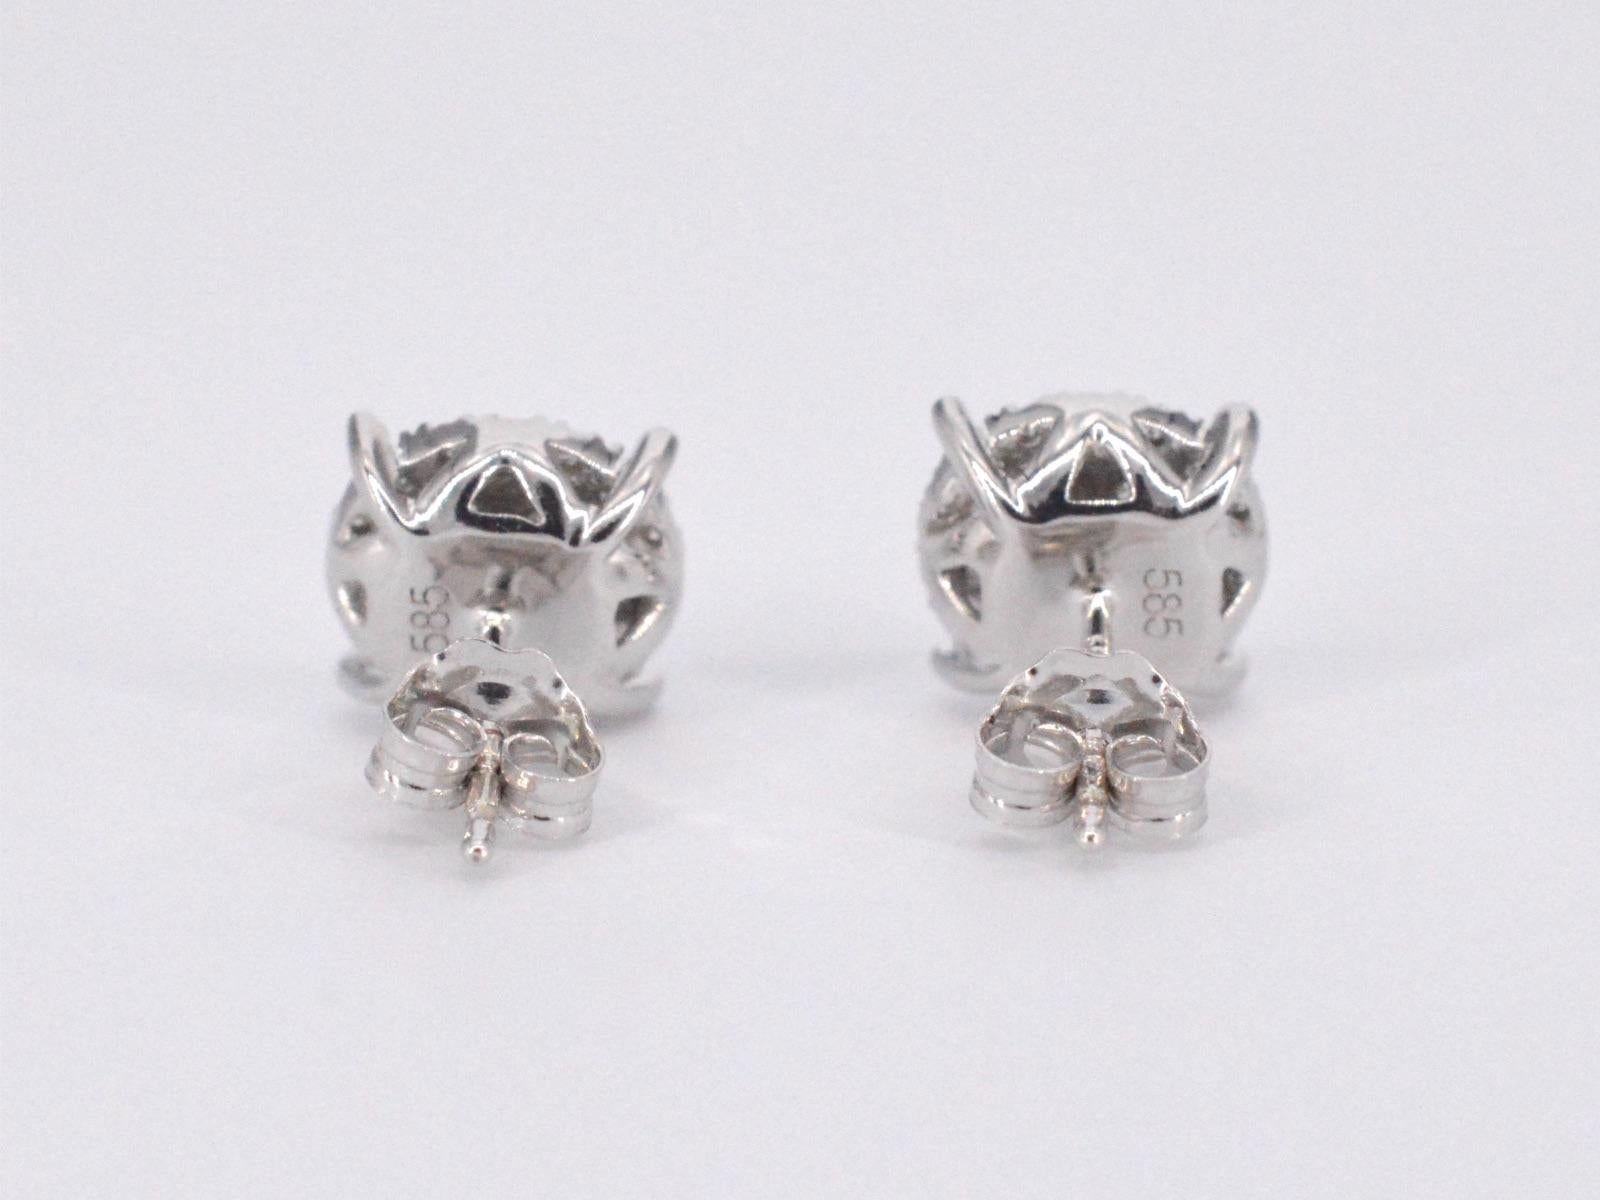 White Gold Earrings with a Brilliant Cut Diamond For Sale 1